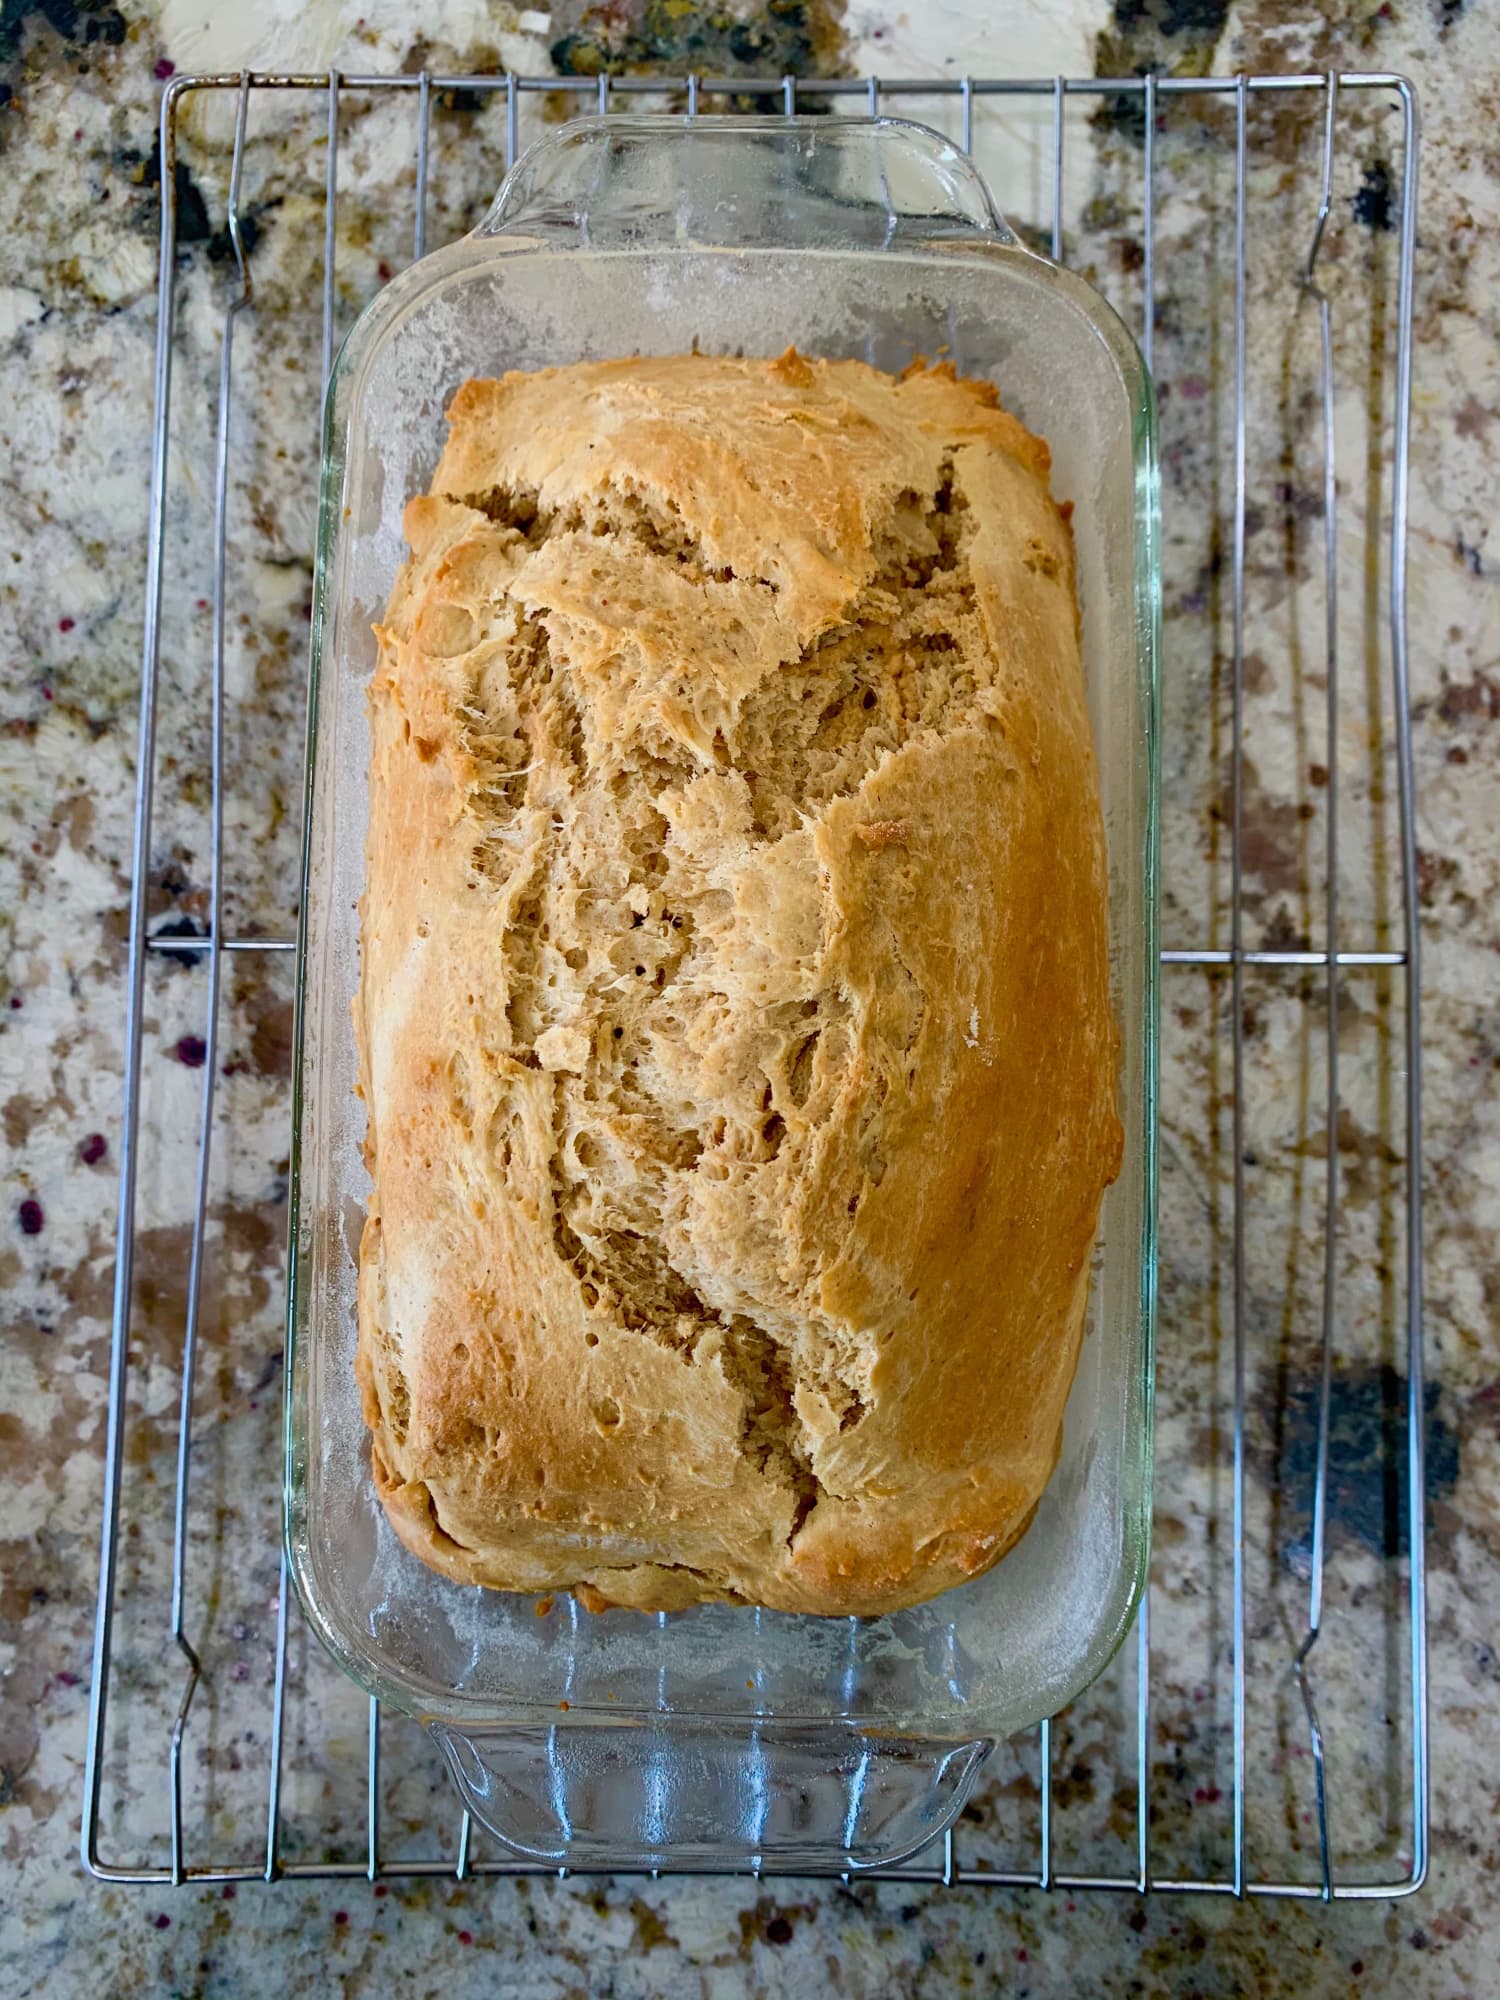 I Tried the Peanut Butter Bread That Reddit Is Obsessed with (and It’s Worth the Hype)